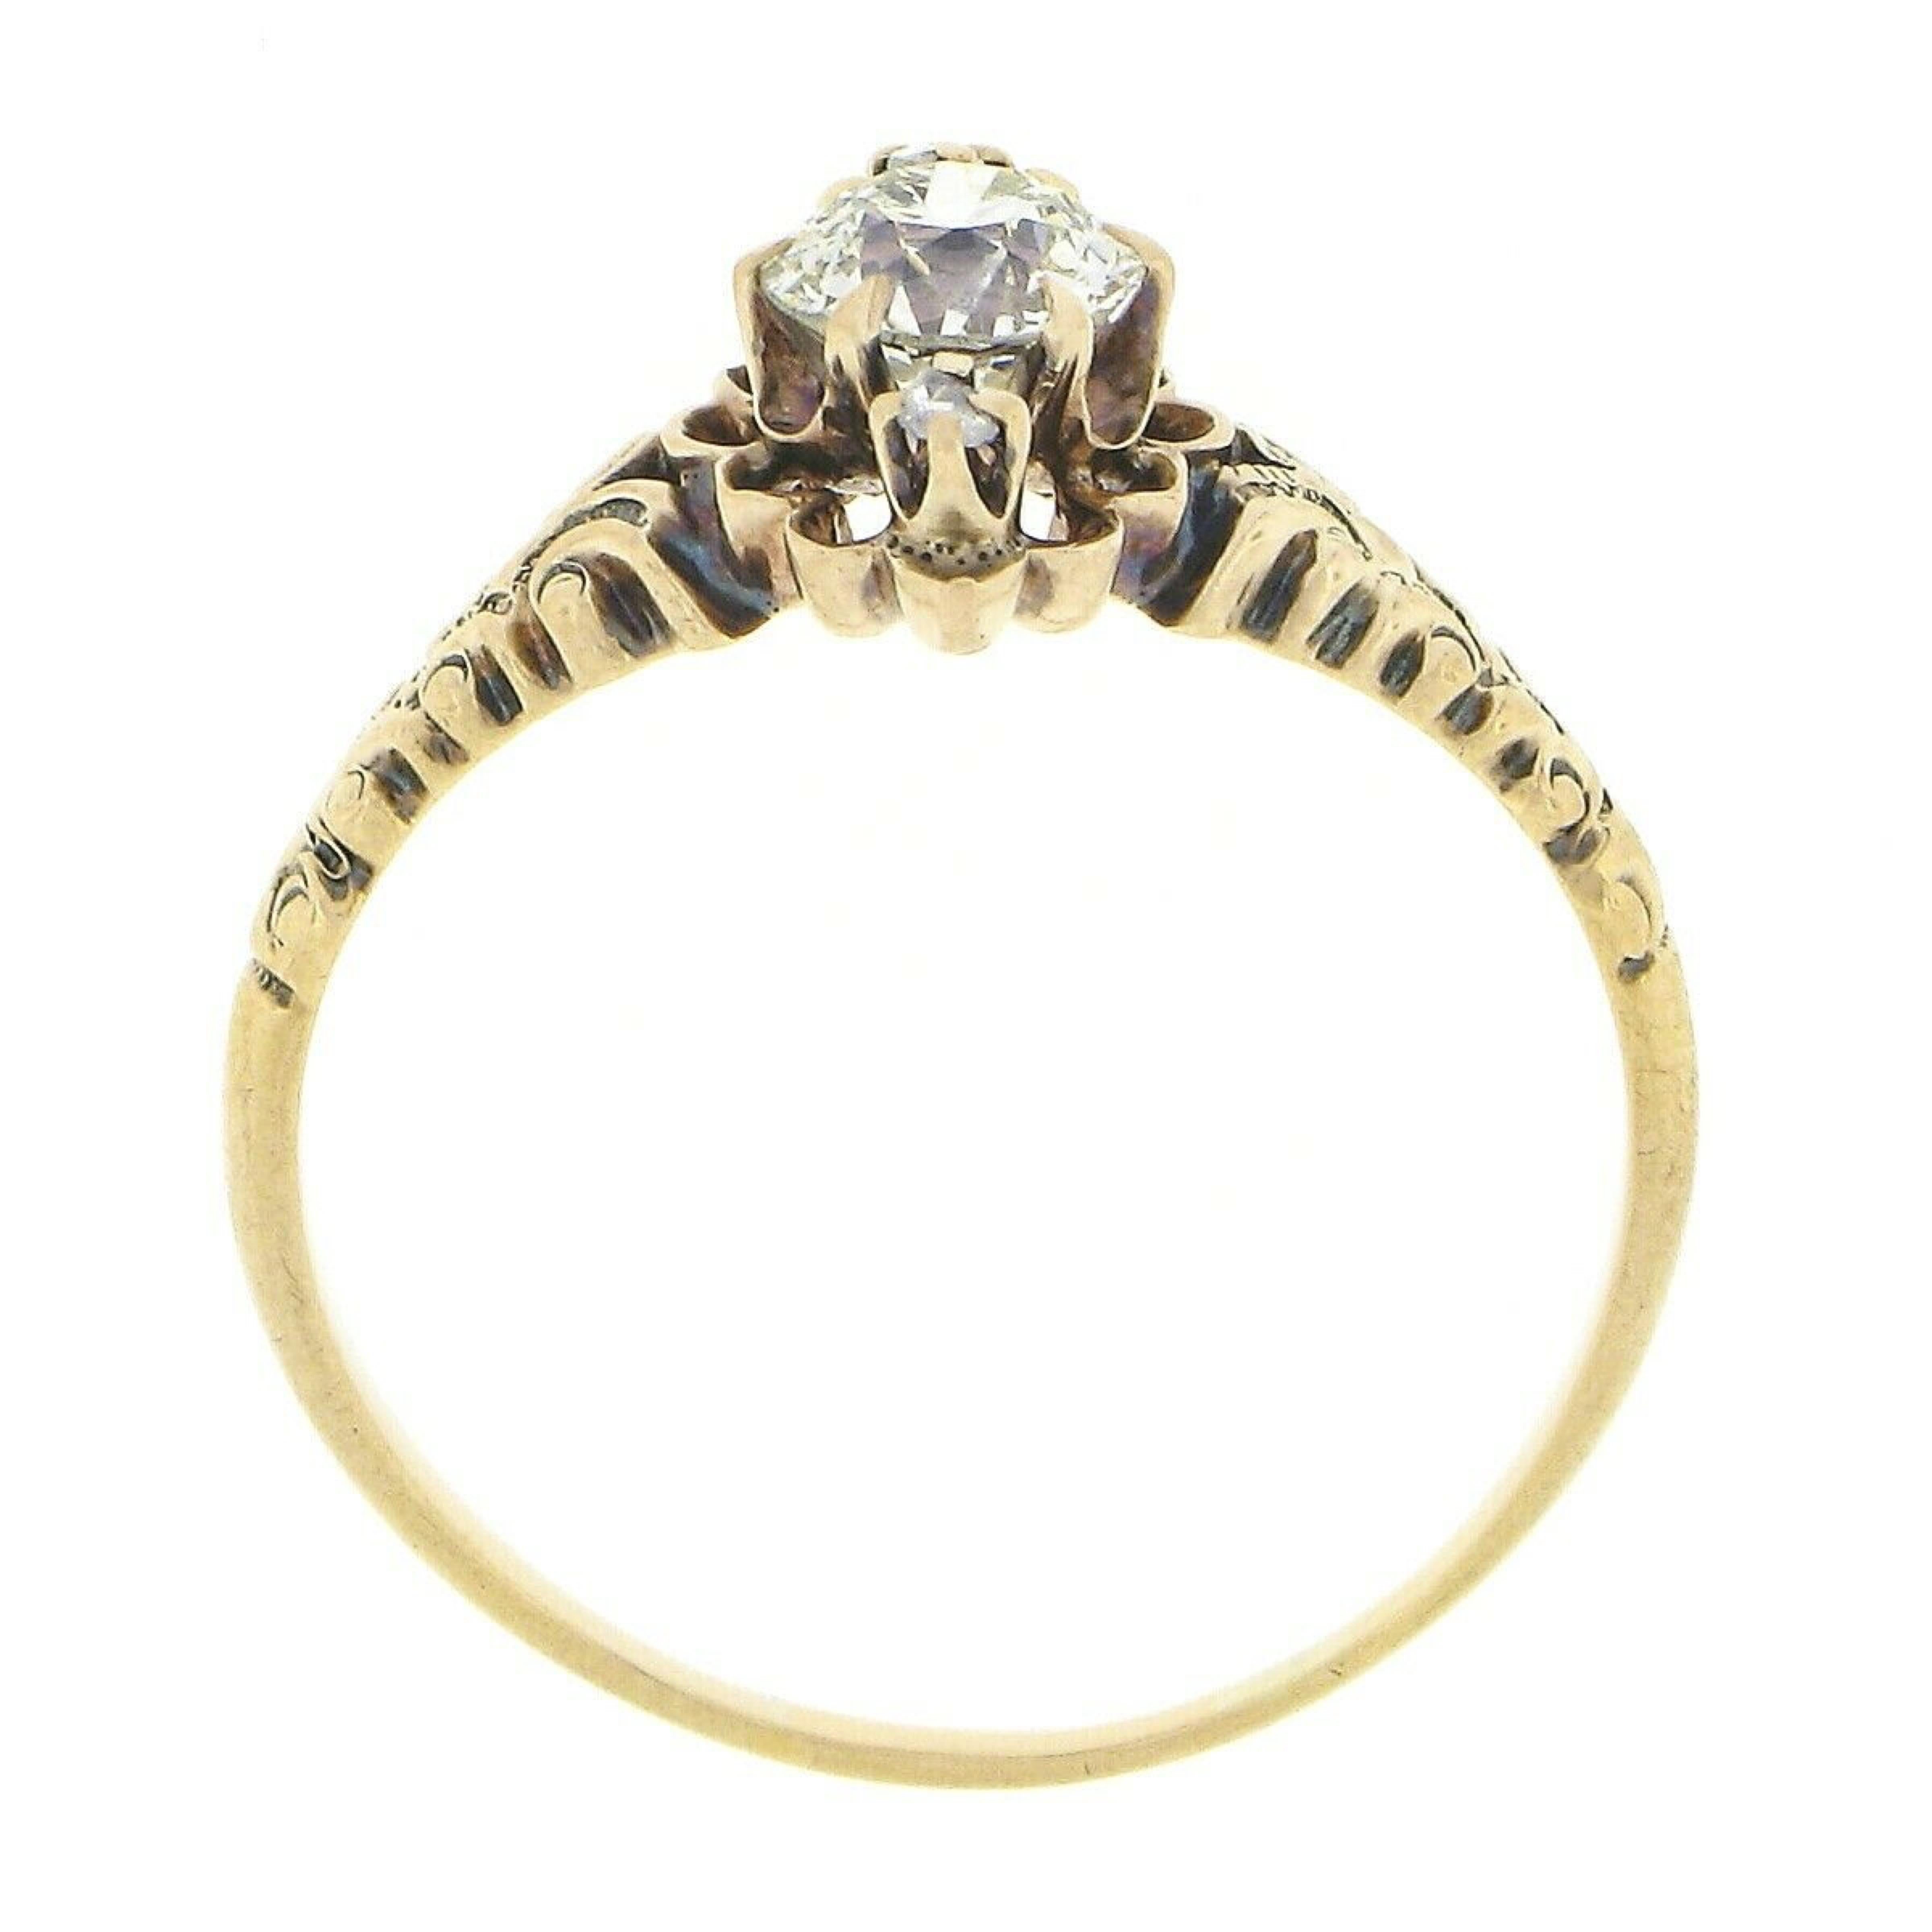 Antique Victorian 14k Gold European Diamond Repousse Domed Sides Engagement Ring 2